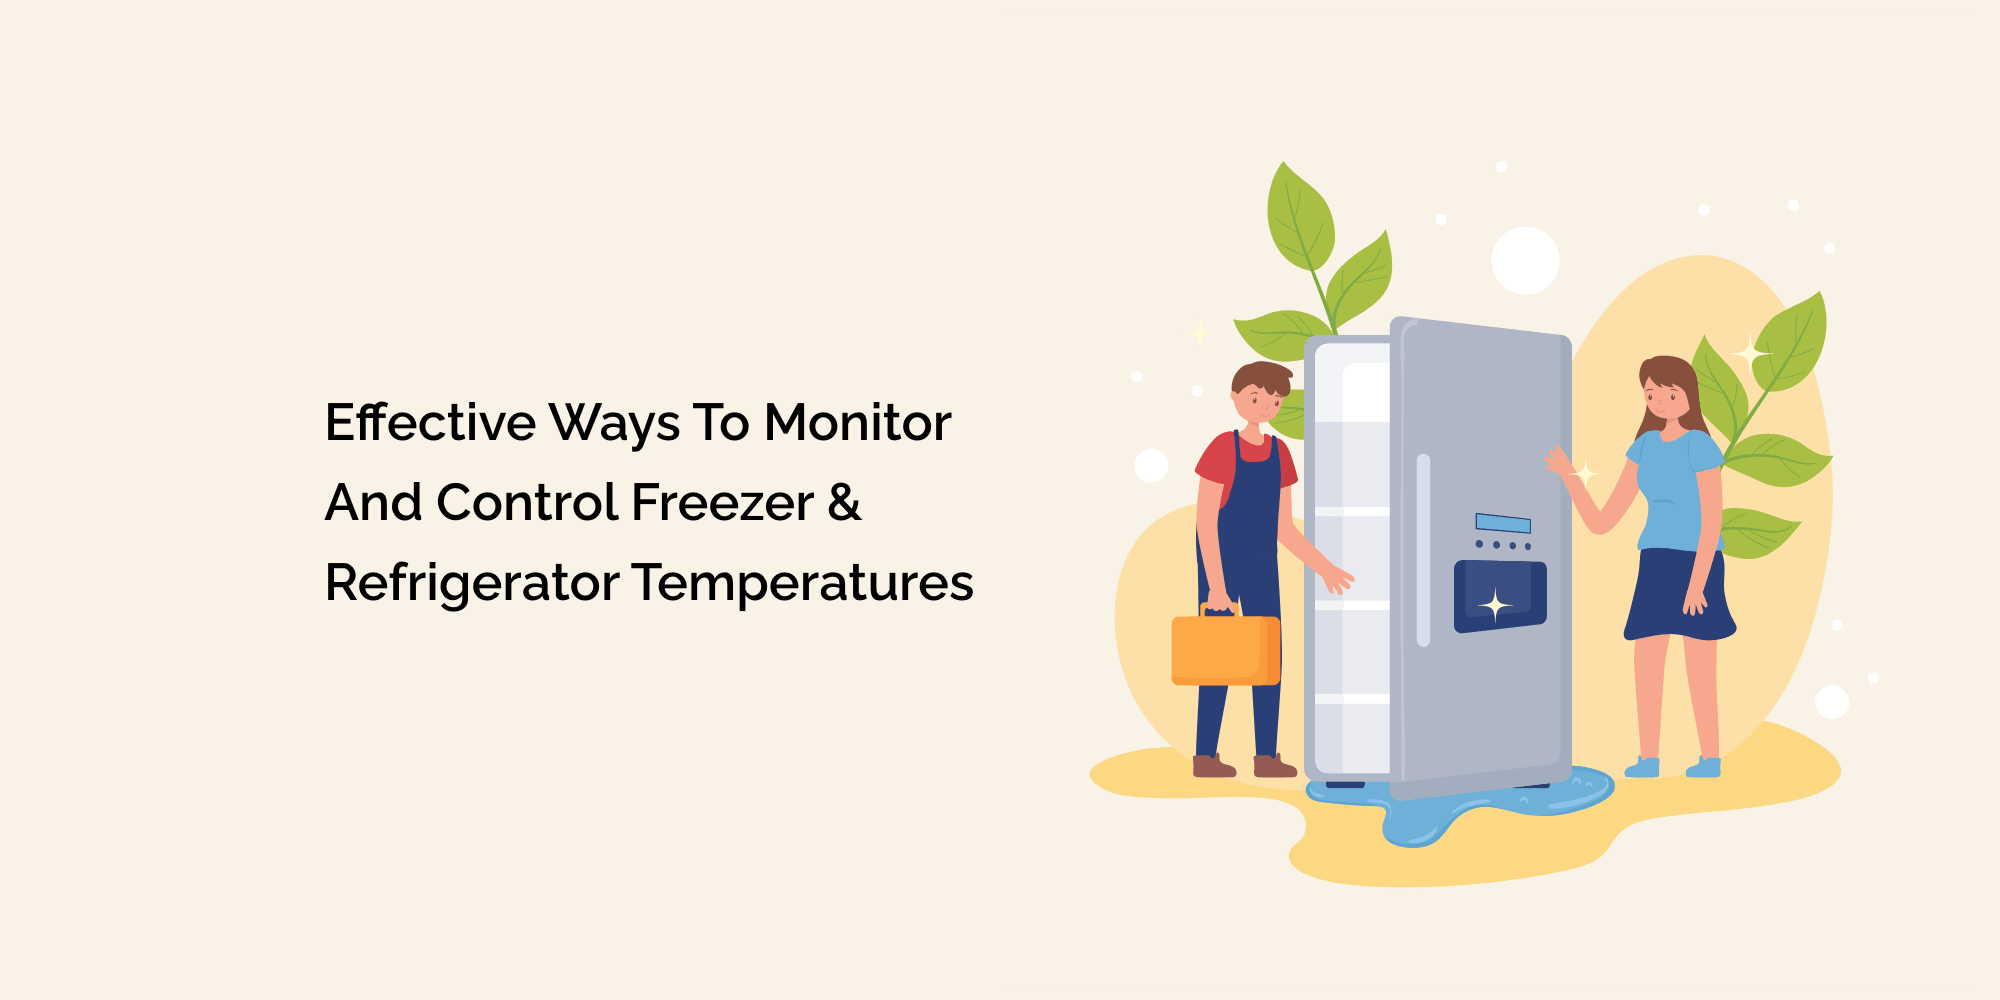 Effective Ways to Monitor and Control Freezer & Refrigerator Temperatures